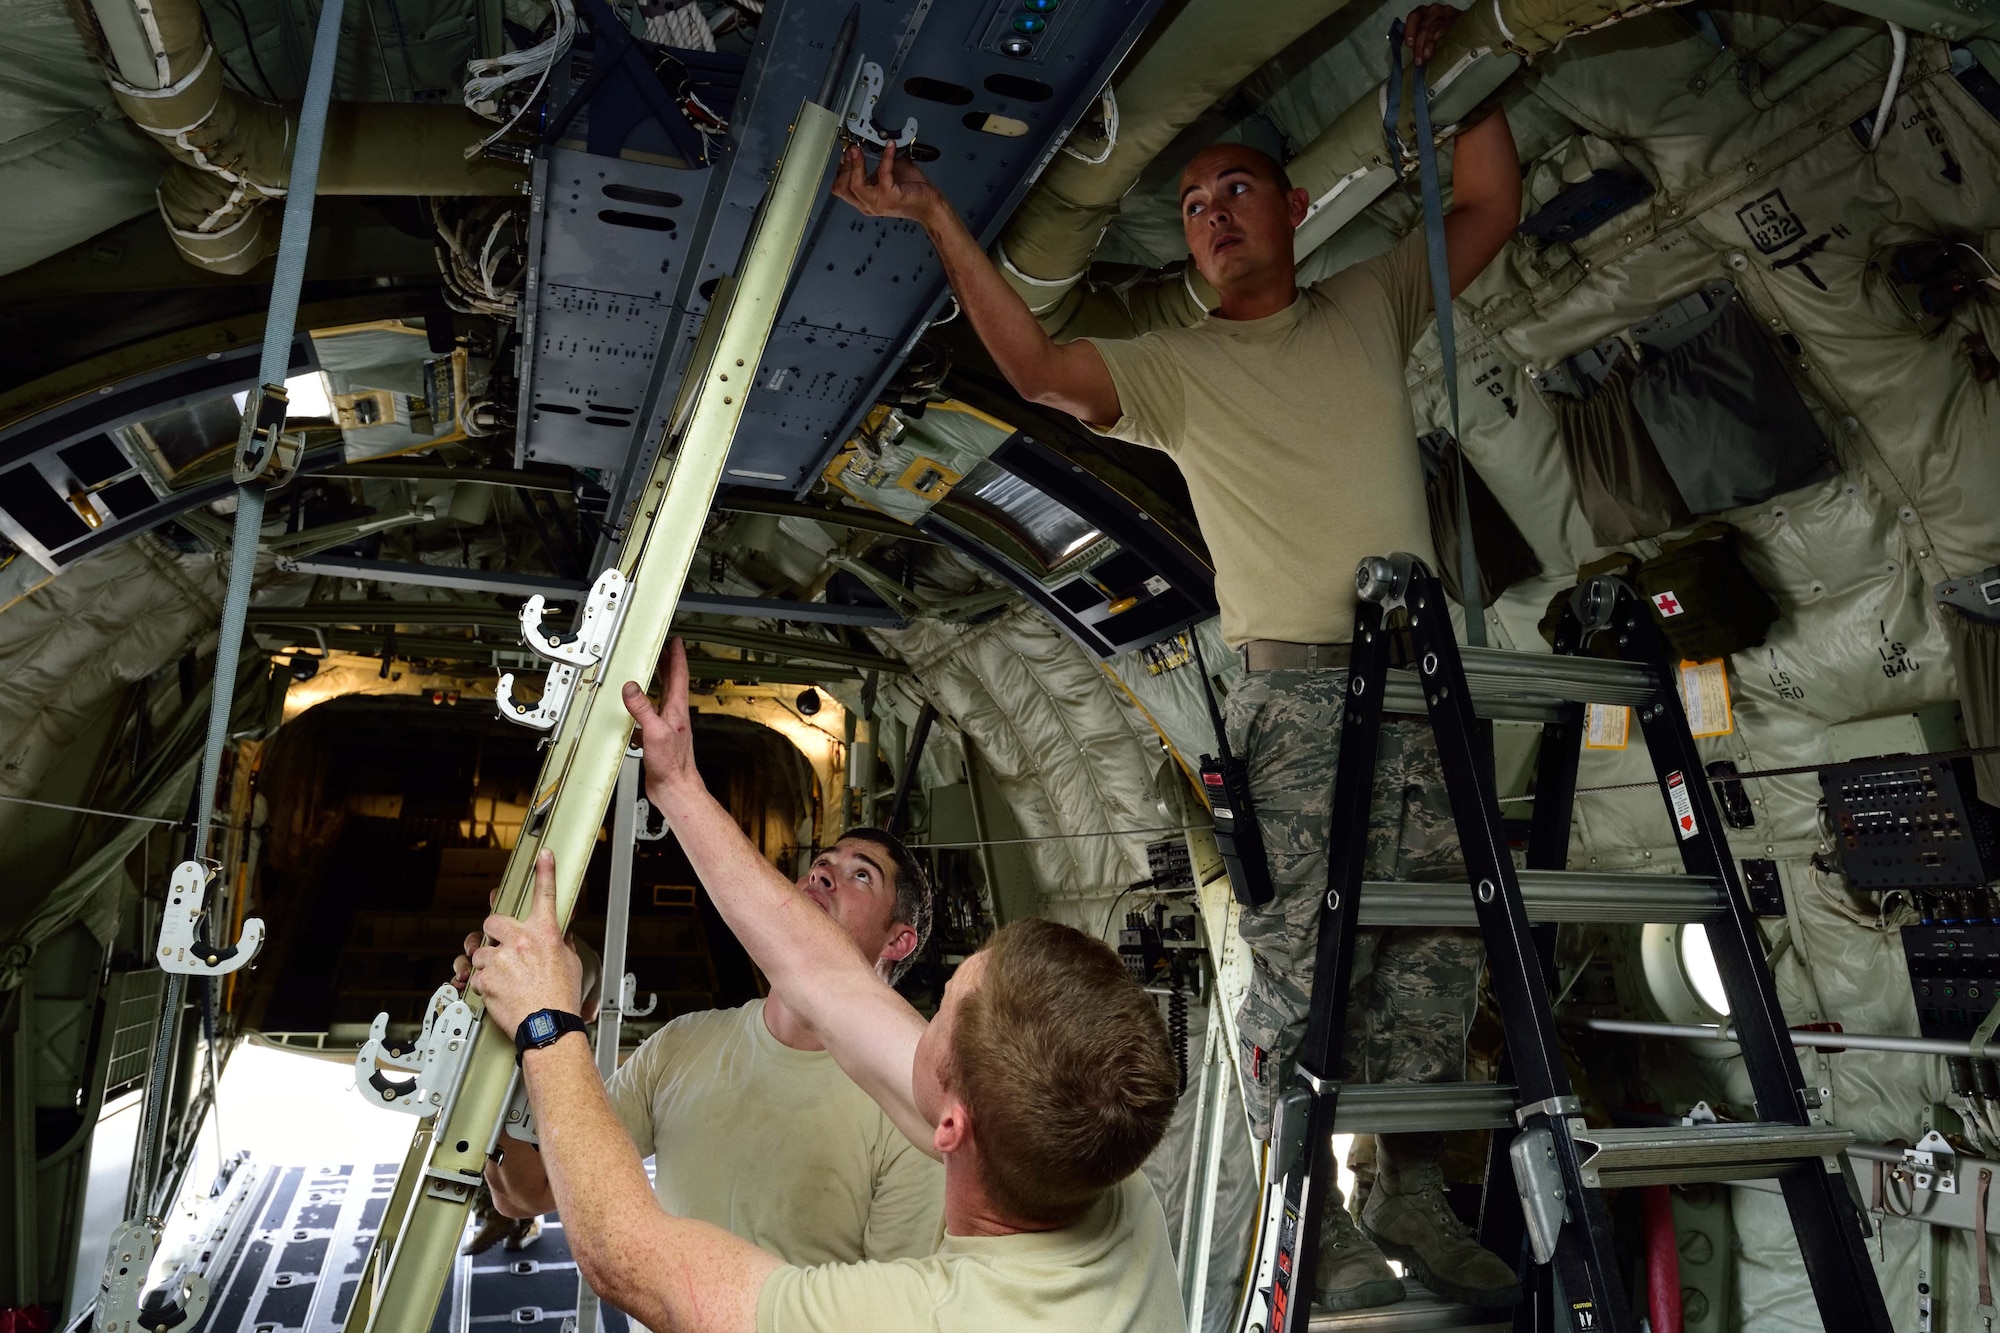 Crew chiefs from the 803rd Aircraft Maintenance Squadron install litter stanchions on a C-130 Super Hercules aircraft at Keesler Air Force Base, Mississippi, in preparation for an aeromedical evacuation exercise Nov. 1, 2017, during Southern Strike 2018. Southern Strike 2018 is a large-scale, joint multinational combat exercise that provides tactical level training for the full spectrum of conflict and emphasizes air dominance, maritime operations, maritime air support, precision engagement, close air support, command and control, personnel recovery, aeromedical evacuation, and combat medical support. (U.S. Air Force photo by Tech. Sgt. Ryan Labadens)